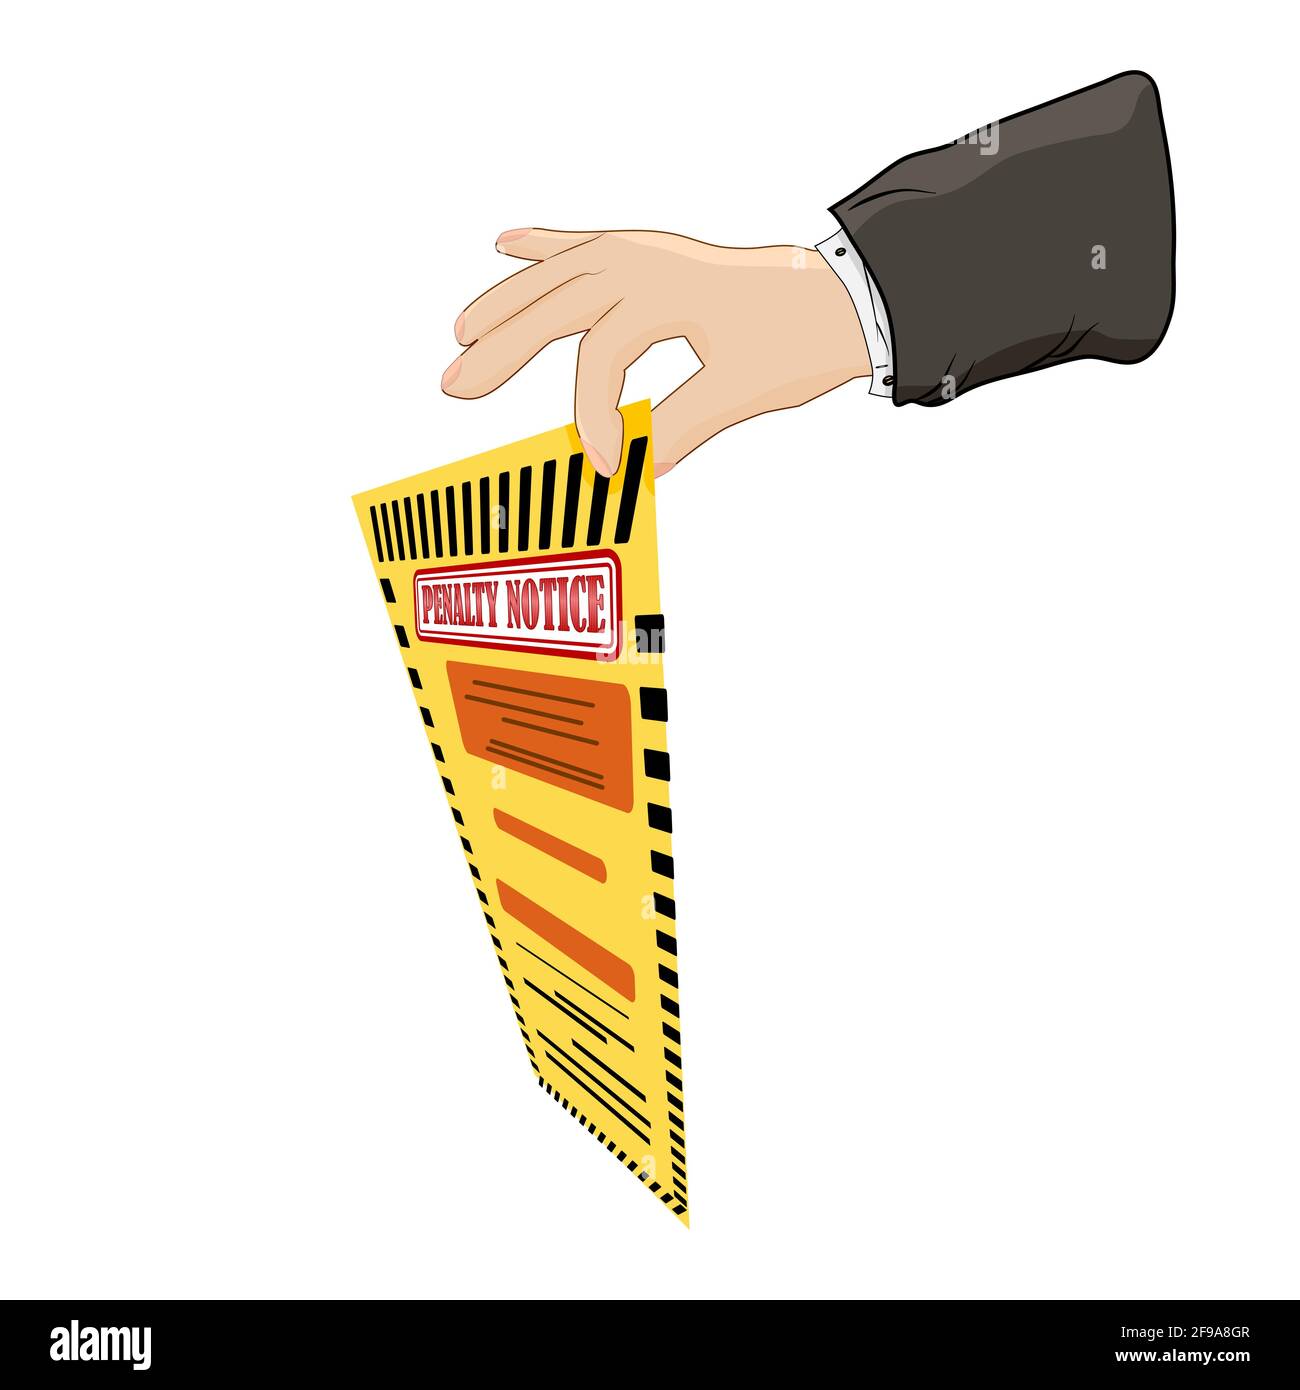 Warden hand holding violation ticket. Hand holding a fine ticket. Police charge bill for speeding or traffic law offense. Stock vector illustration Stock Vector